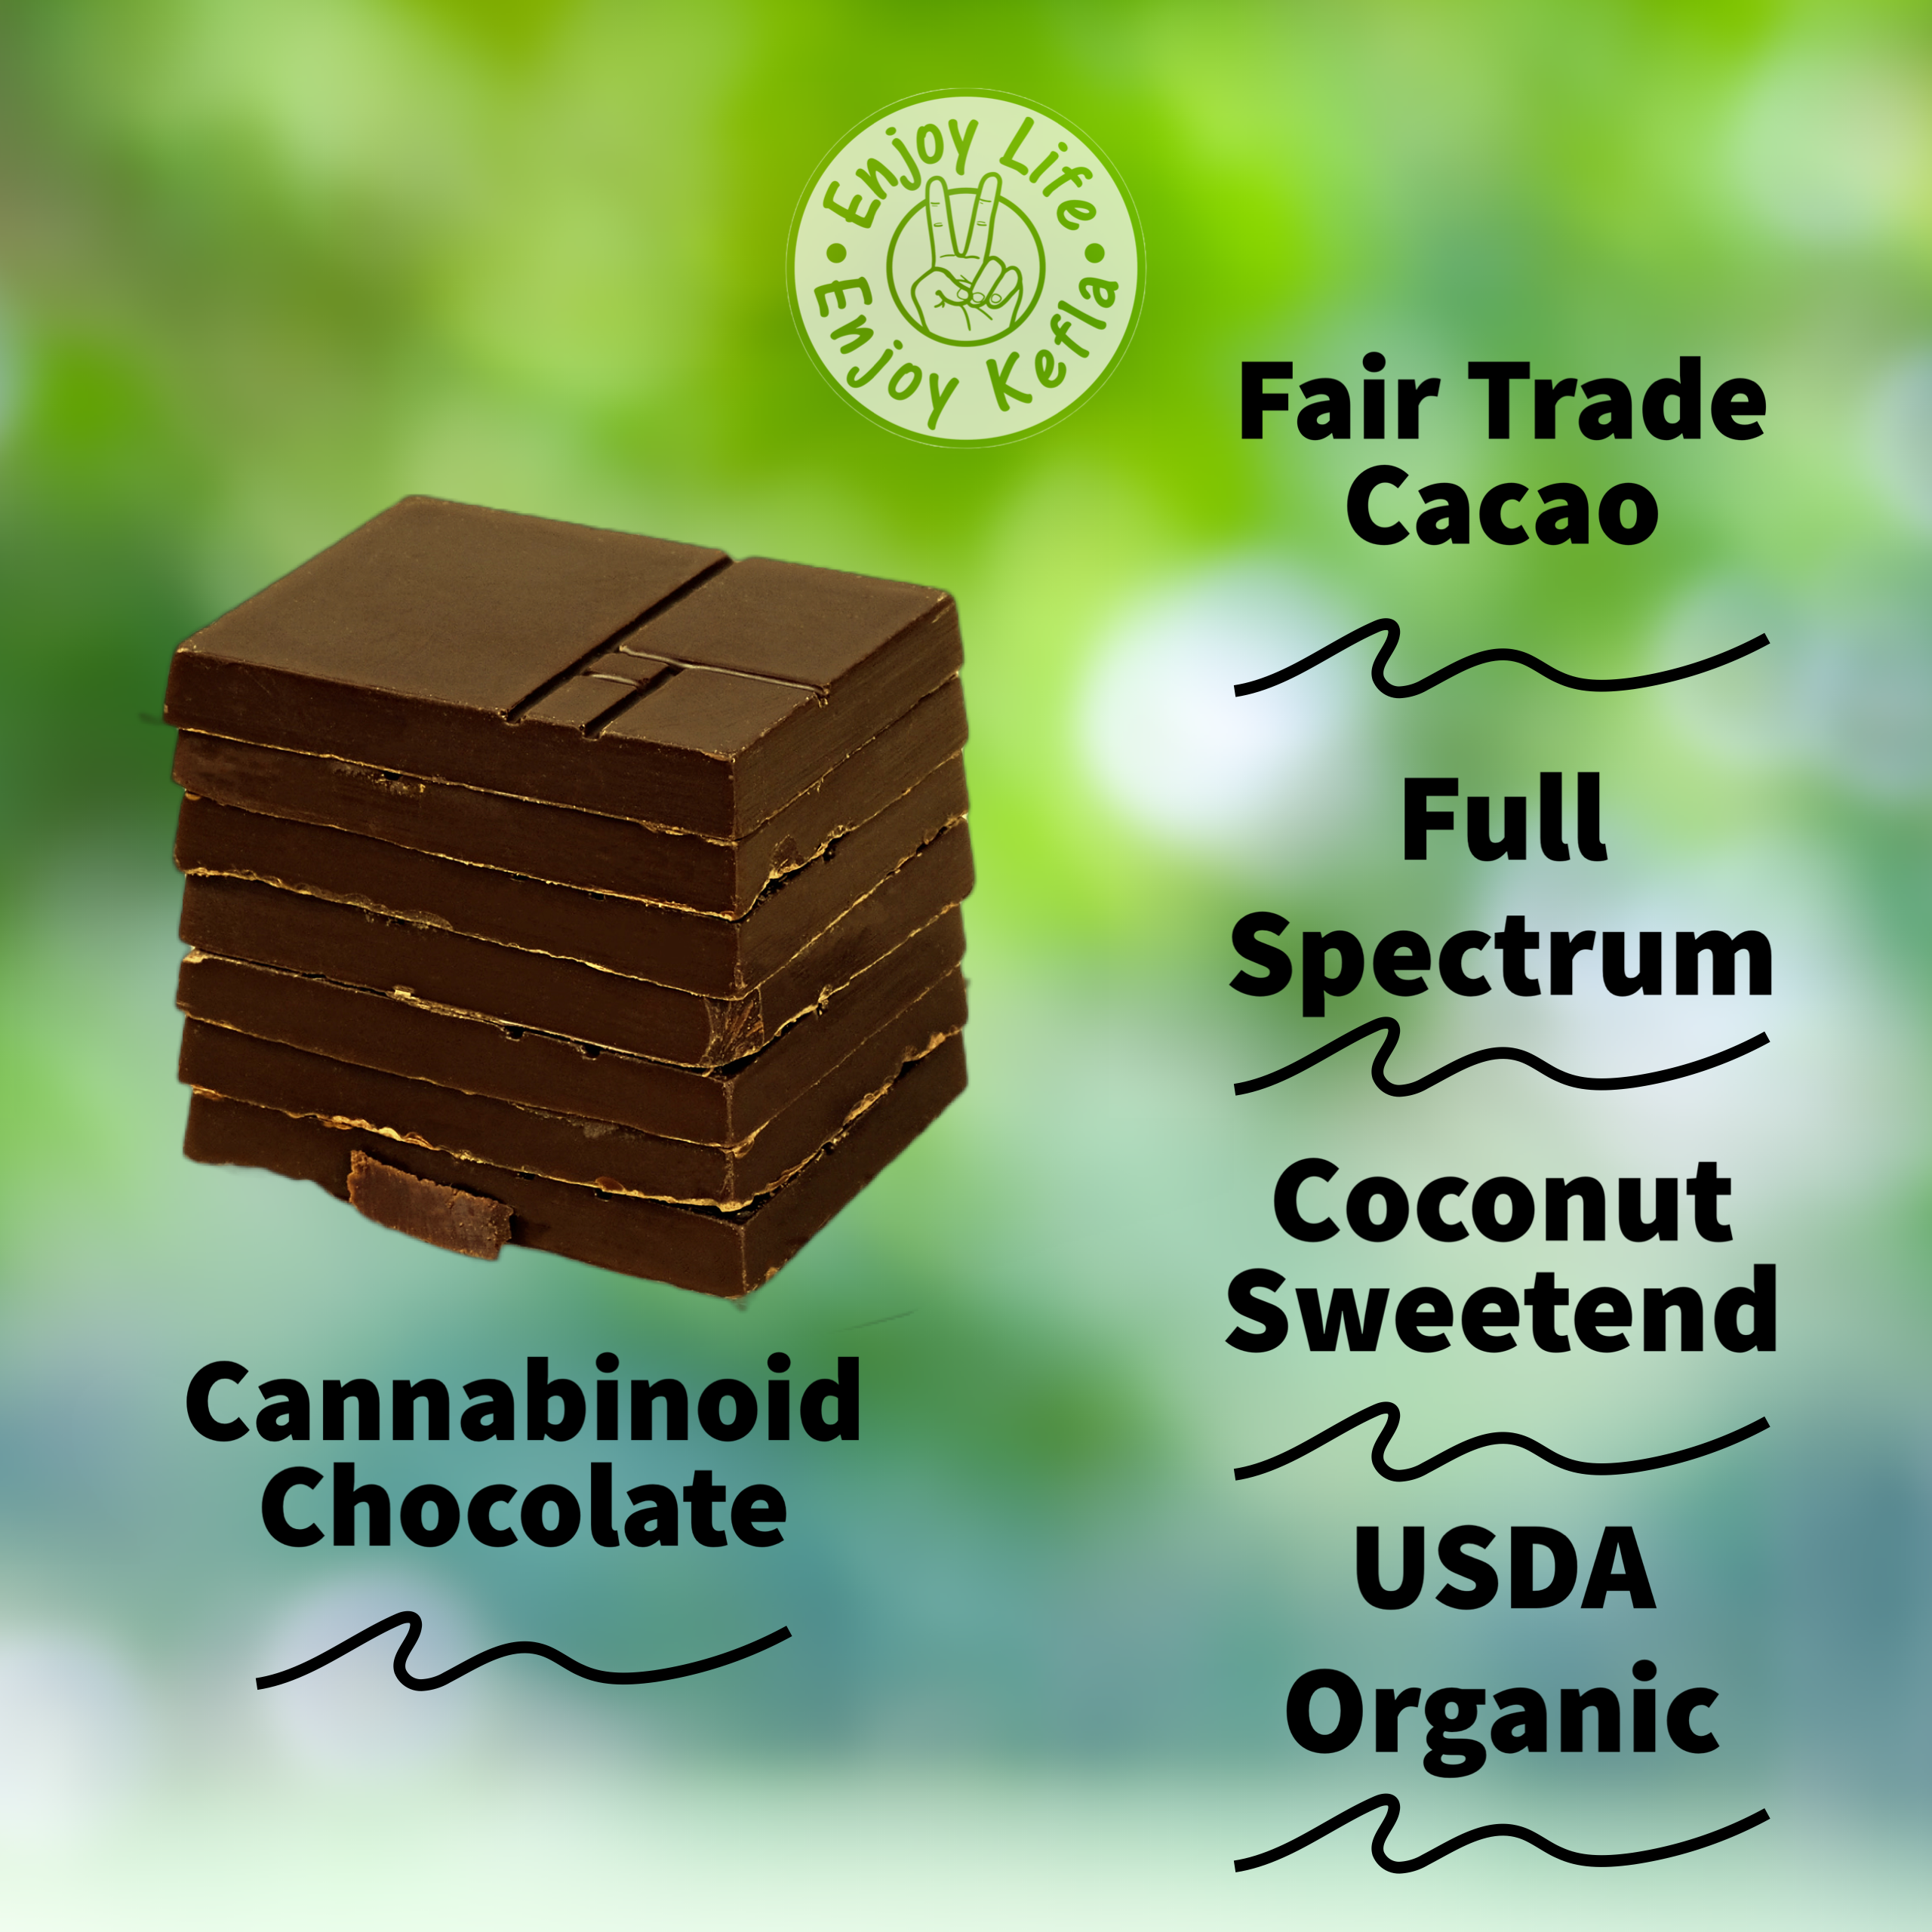 kefla_organics_cannabinoid_chocolate_product_information_specifications.png